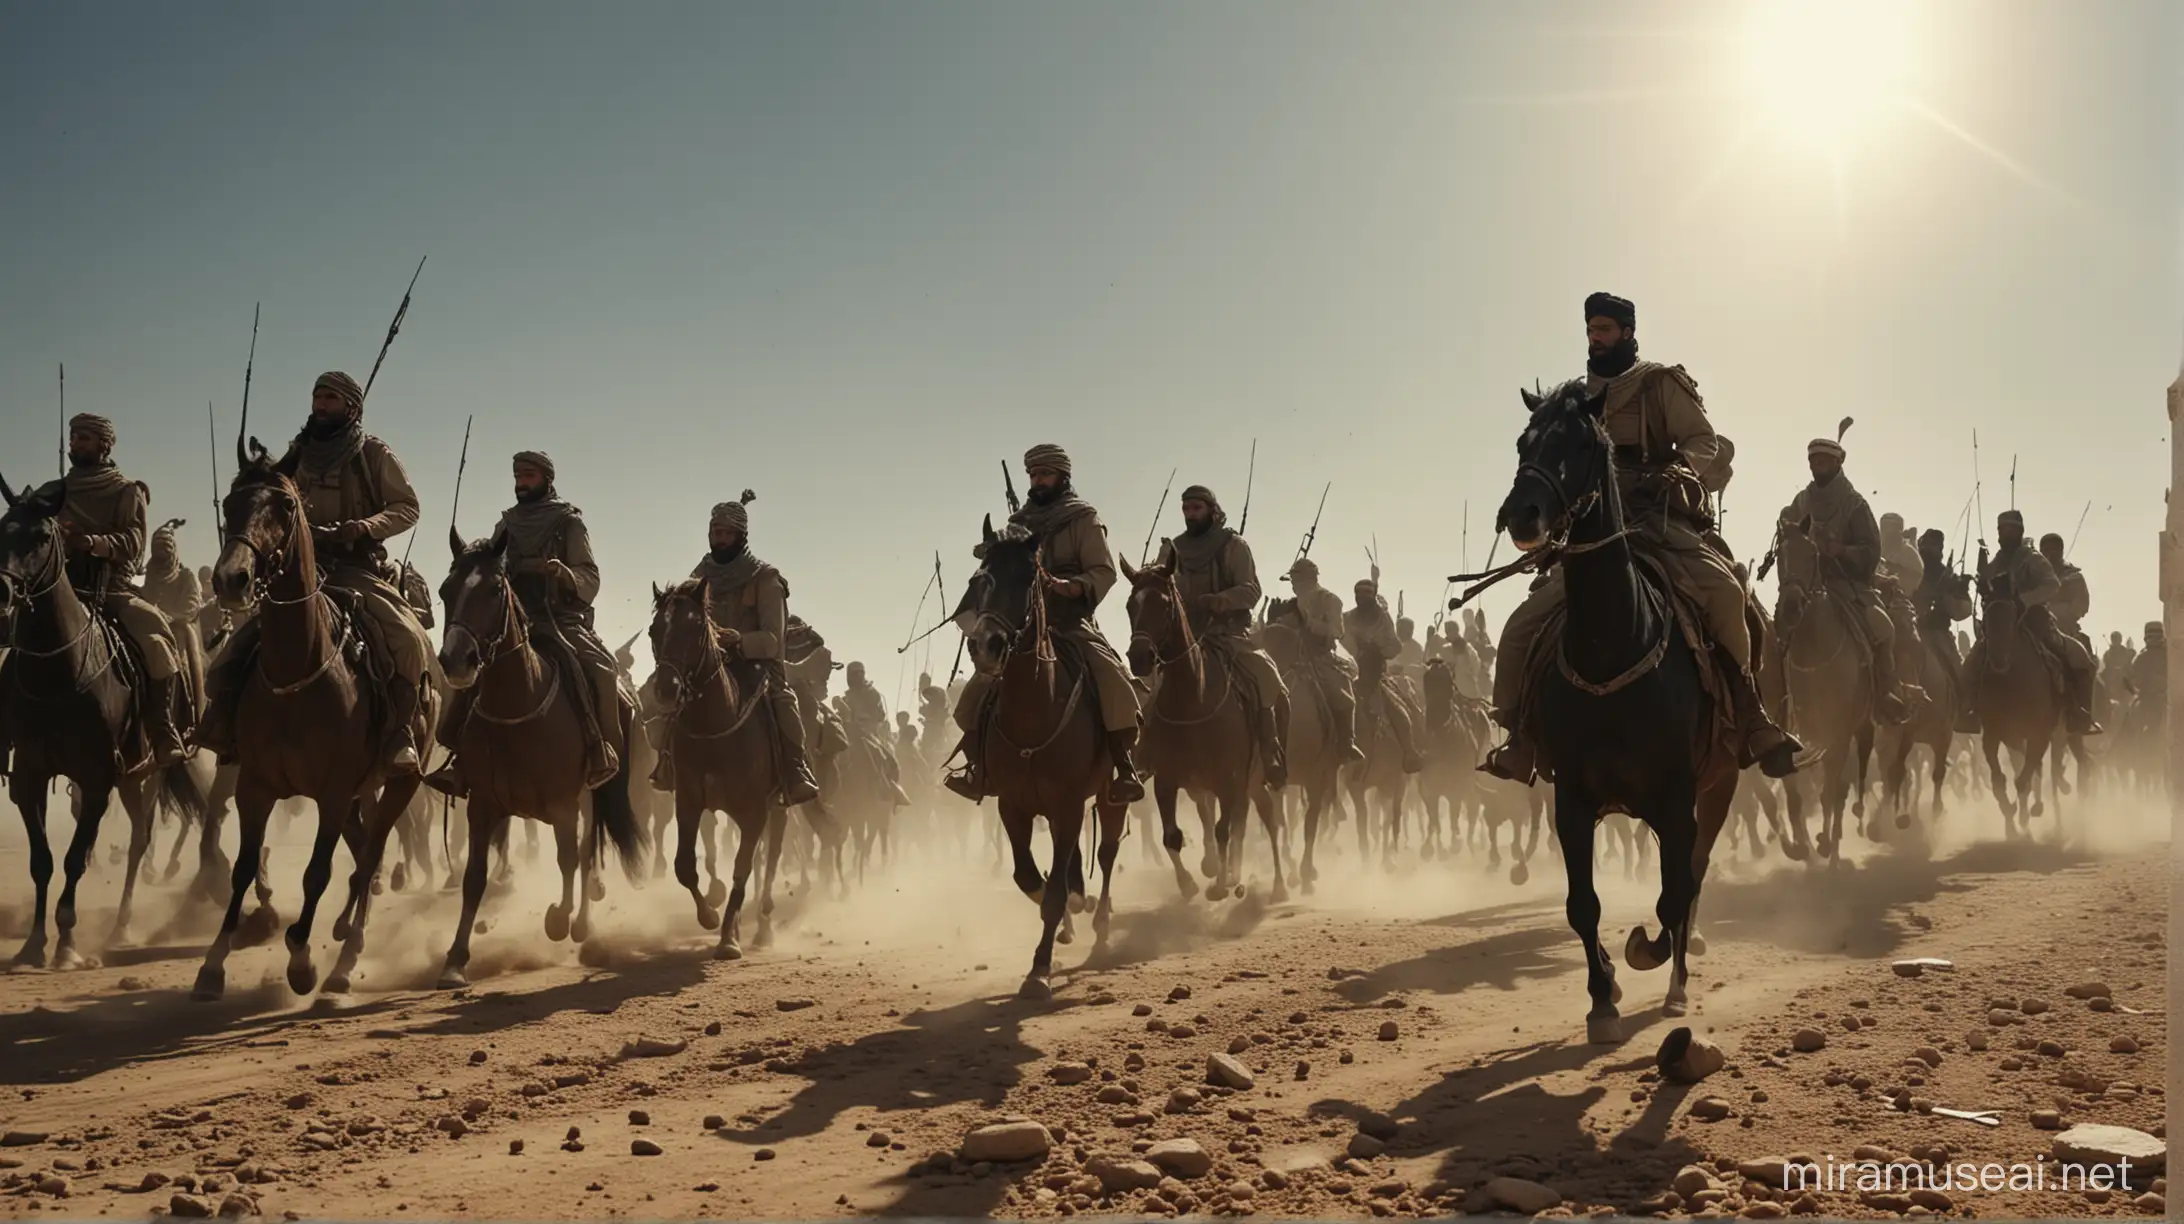 Epic Battle Scene 30000 Muslim Soldiers Led by Three Strong Islamic Warriors in Jihad